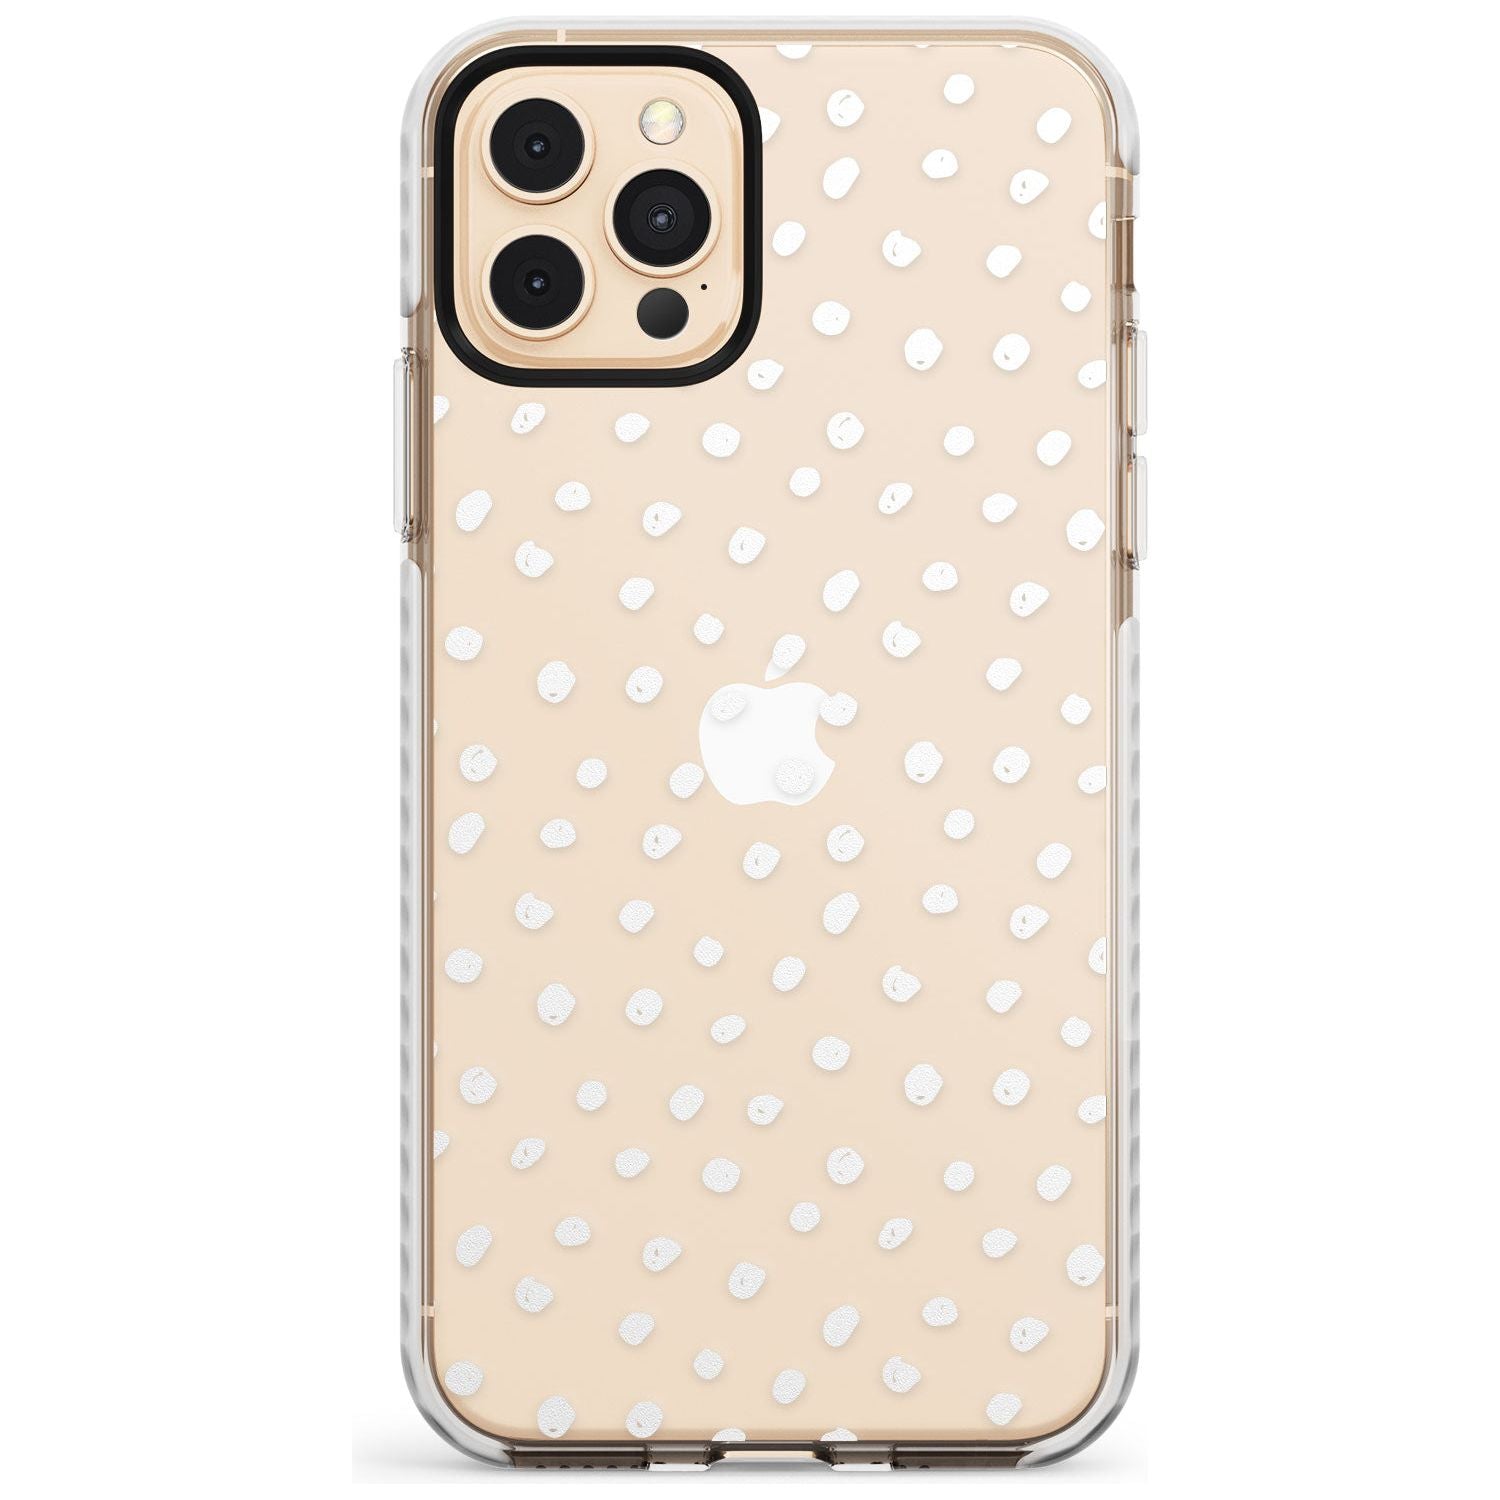 Messy White Dot Pattern Slim TPU Phone Case for iPhone 11 Pro Max